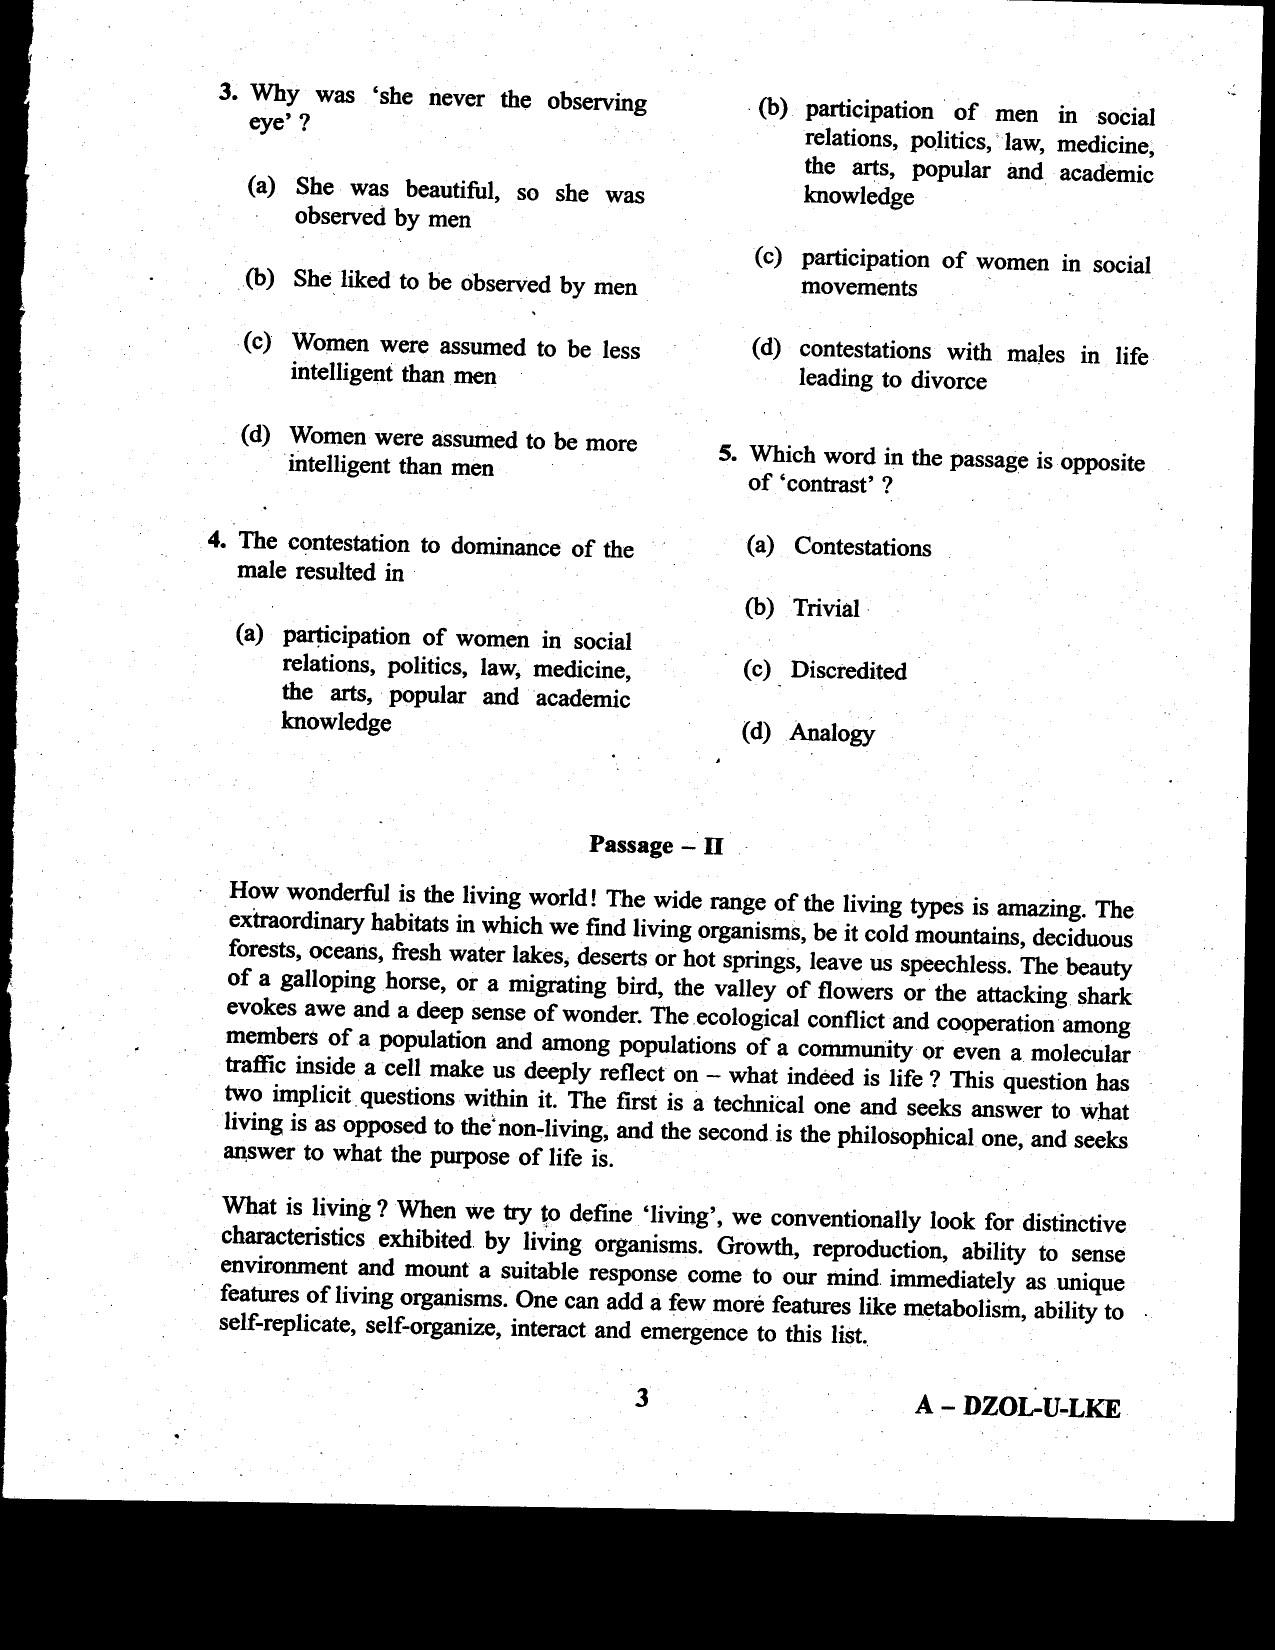 CDS II Examination 2020 English Question Paper - Image 3